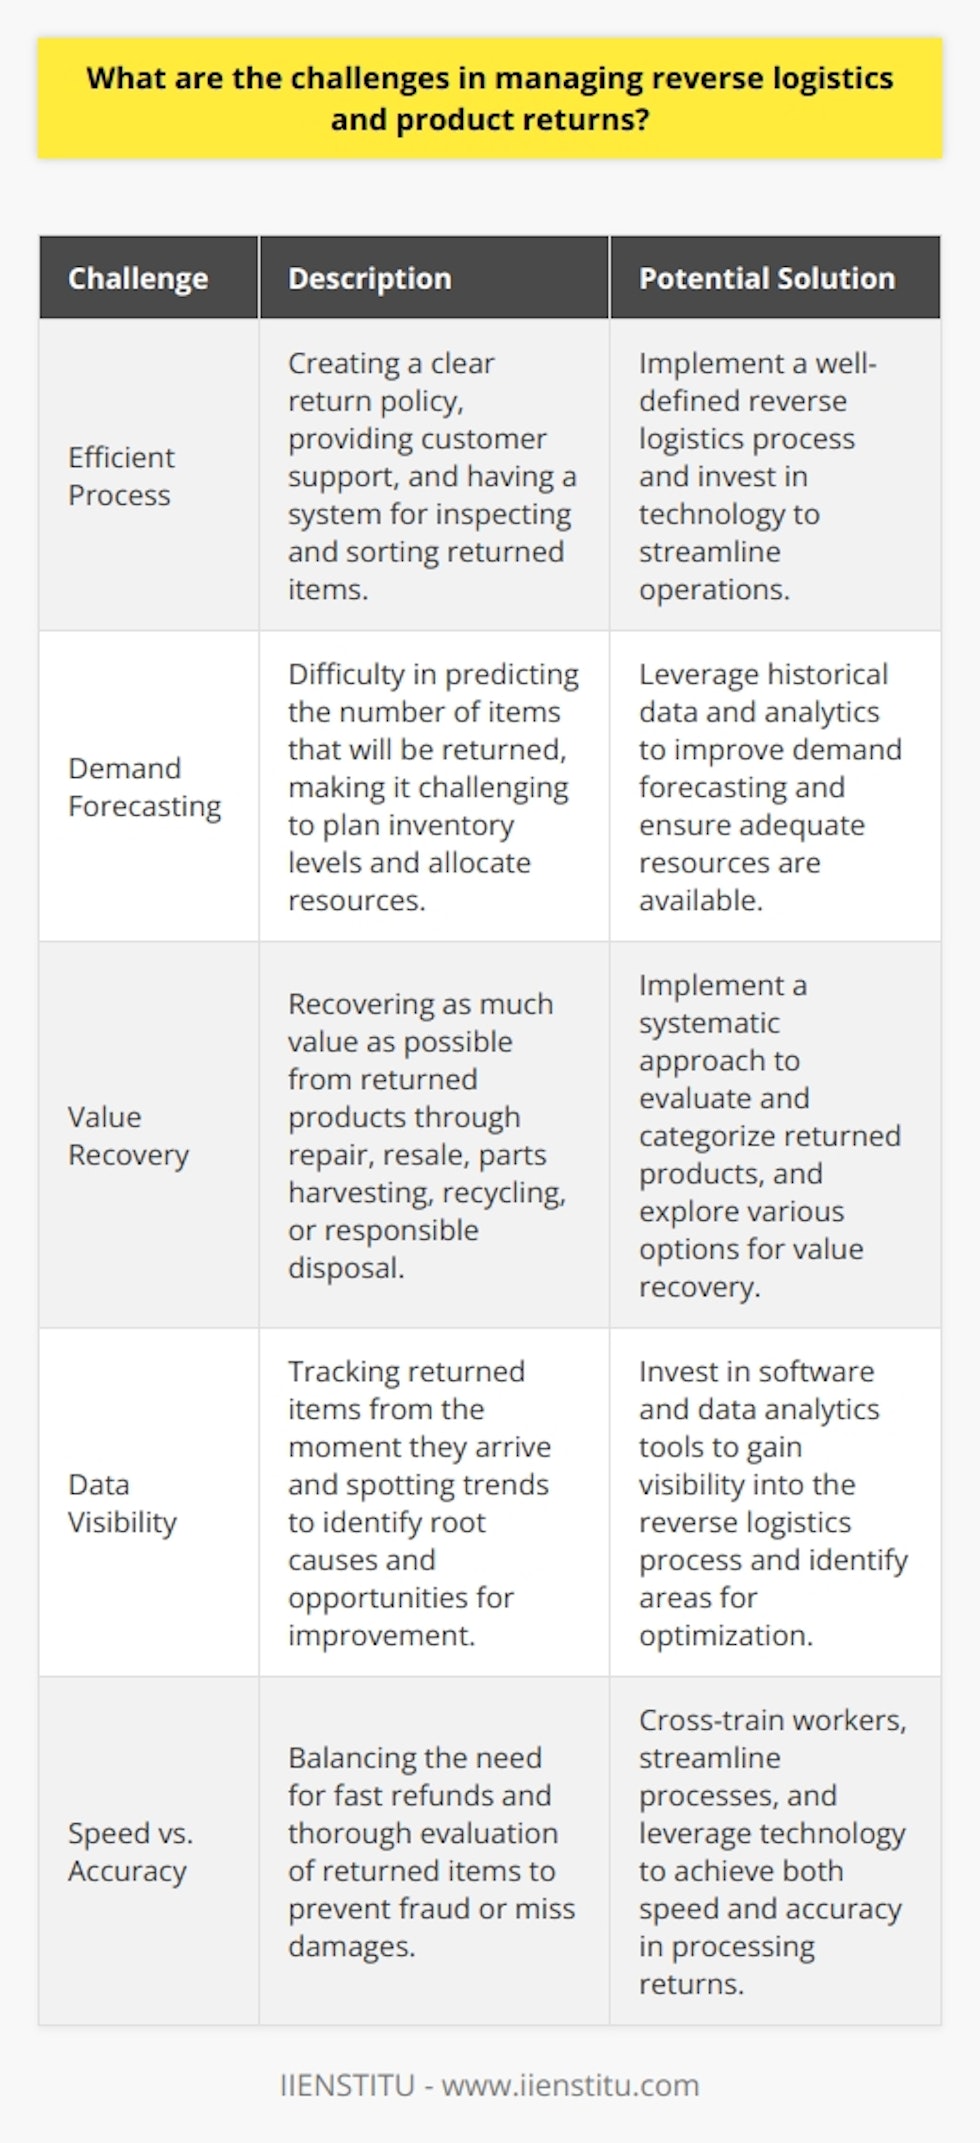 Managing reverse logistics and product returns presents several challenges. First, it requires a well-designed process for handling returns efficiently. This involves creating a clear policy, providing customer support, and having a system for inspecting and sorting returned items. Forecasting Demand Another challenge is forecasting demand for returned products. It can be difficult to predict how many items will be sent back. This uncertainty makes it tricky to plan inventory levels and allocate resources appropriately. Maximizing Value Recovery Once products are returned, the goal is to recover as much value from them as possible. This could mean repairing and reselling them, harvesting them for parts, recycling materials, or disposing of them responsibly. Each option has different costs and benefits to weigh. In my experience, having good data visibility is key. When I worked in returns processing for an electronics company, we invested in software to track returned items from the moment they arrived at our facility. This let us spot trends, like certain products having higher return rates. We could then work with our product design and quality control teams to investigate and  make improvements. Balancing Speed and Accuracy Theres often a trade-off between processing returns quickly and thoroughly evaluating each item. Customers want fast refunds, but you dont want to miss damage or fraud. Cross-training workers helped us stay efficient. At the end of the day, smart reverse logistics can turn a painful process into an opportunity. By refurbishing products whenever possible and recycling everything else, companies can recoup costs, reduce waste, and even boost customer loyalty. Its a complex undertaking, but in my view, the benefits are well worth the effort.